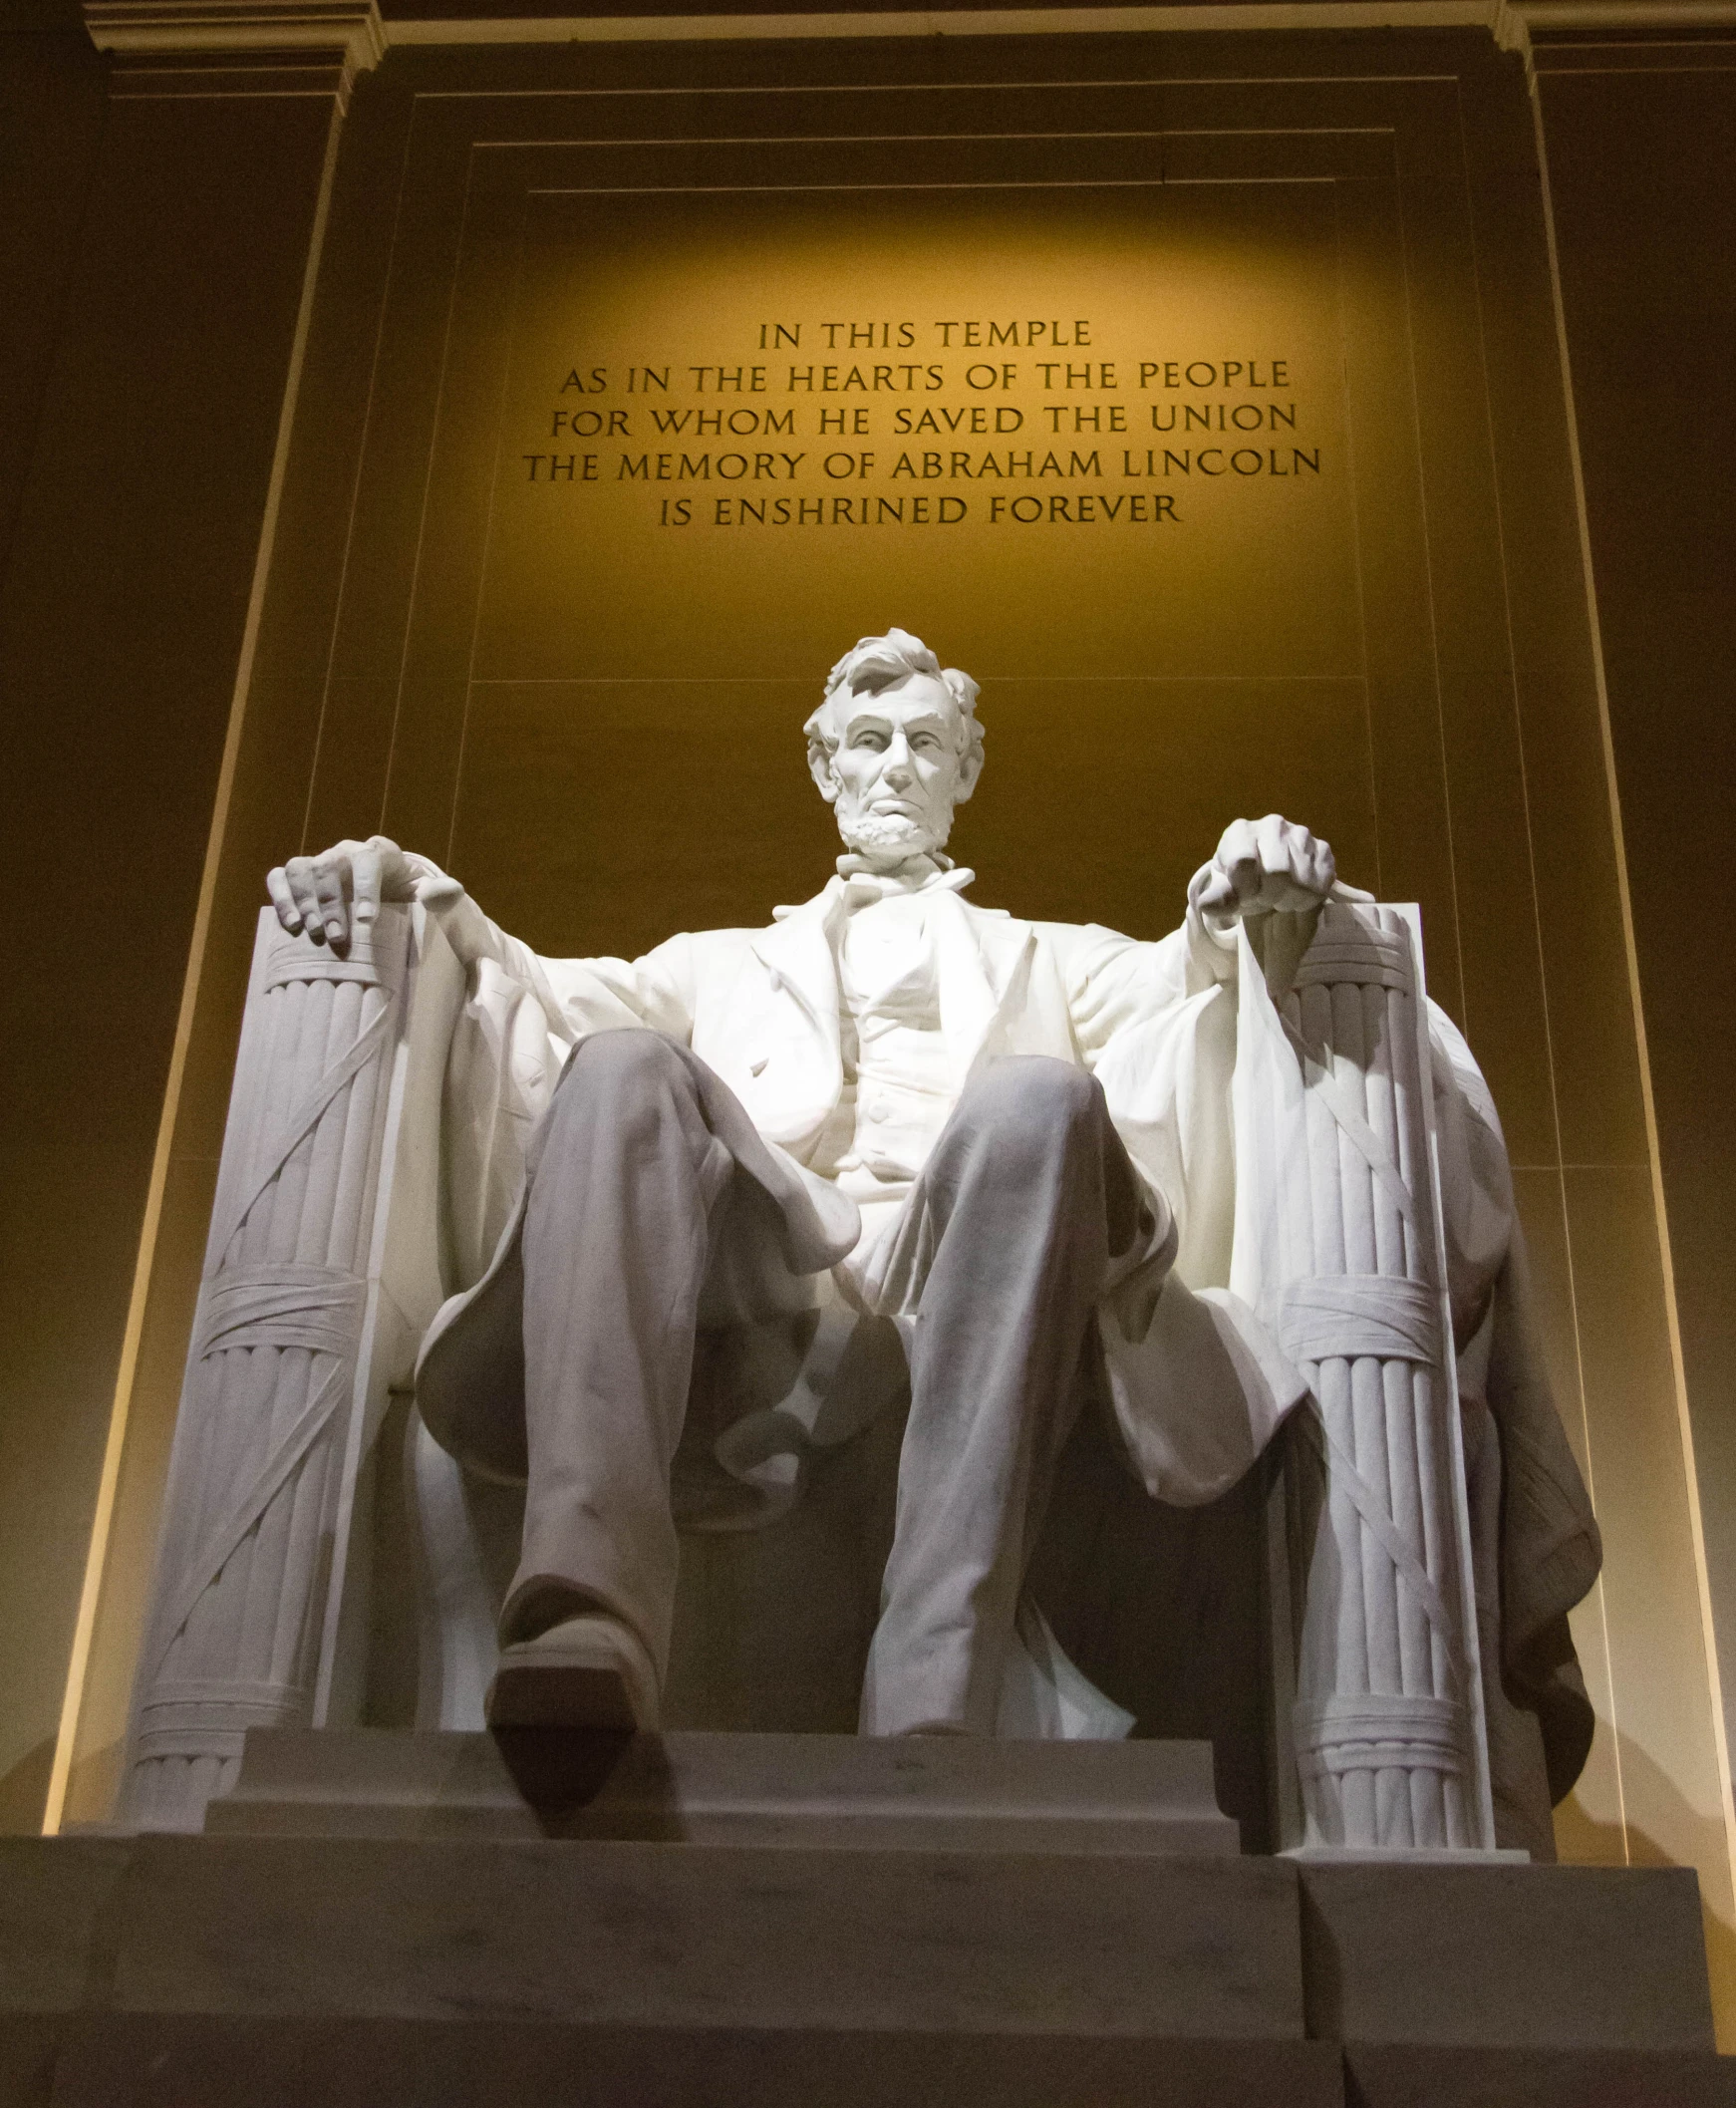 there is a statue of aham lincoln with words written in it